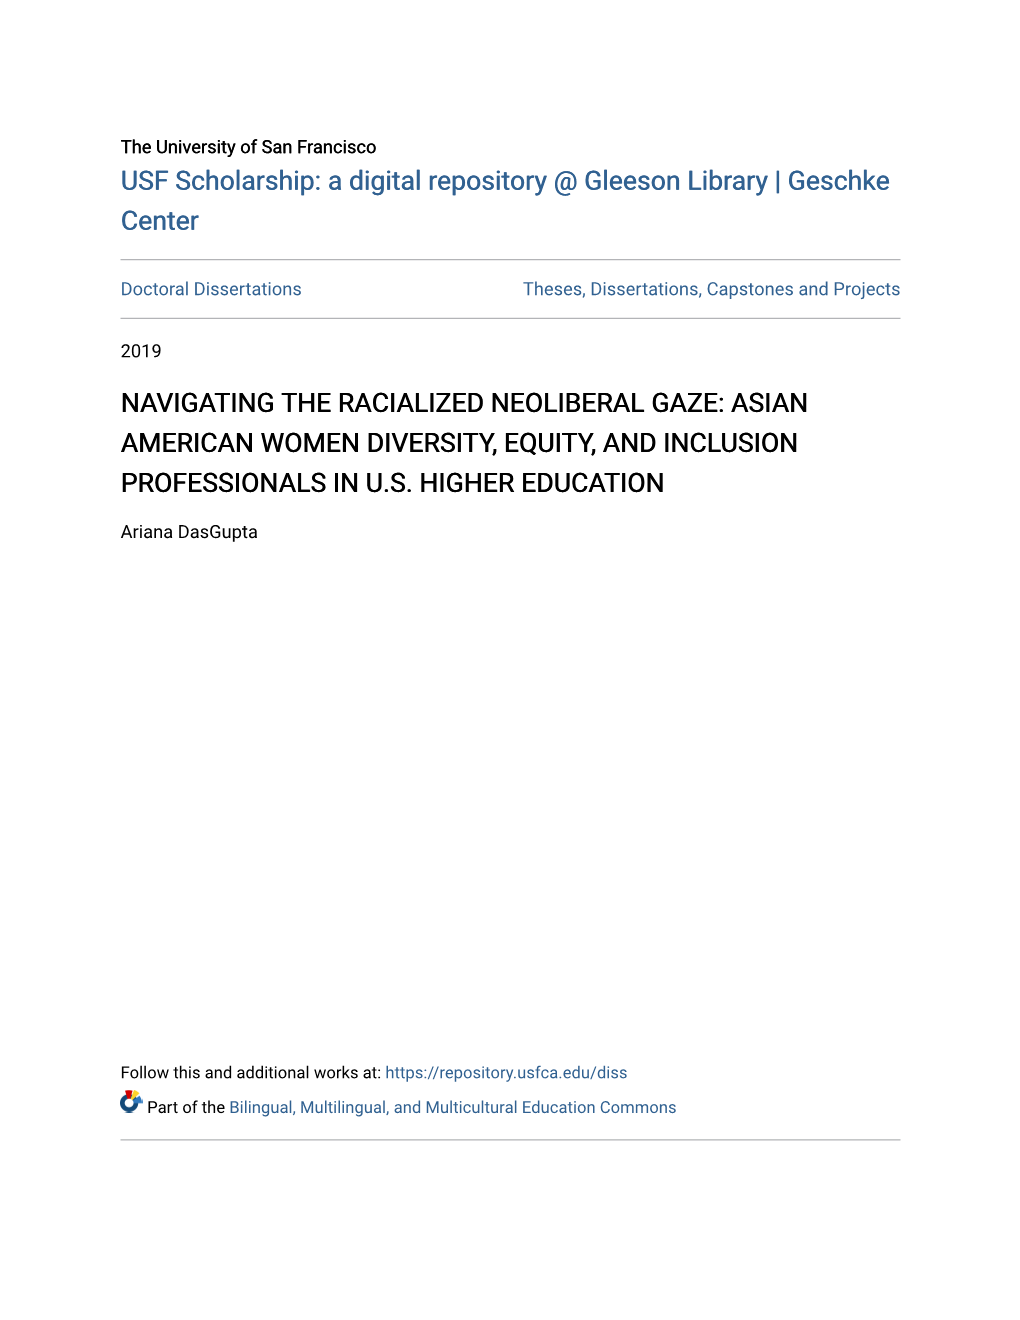 Navigating the Racialized Neoliberal Gaze: Asian American Women Diversity, Equity, and Inclusion Professionals in U.S